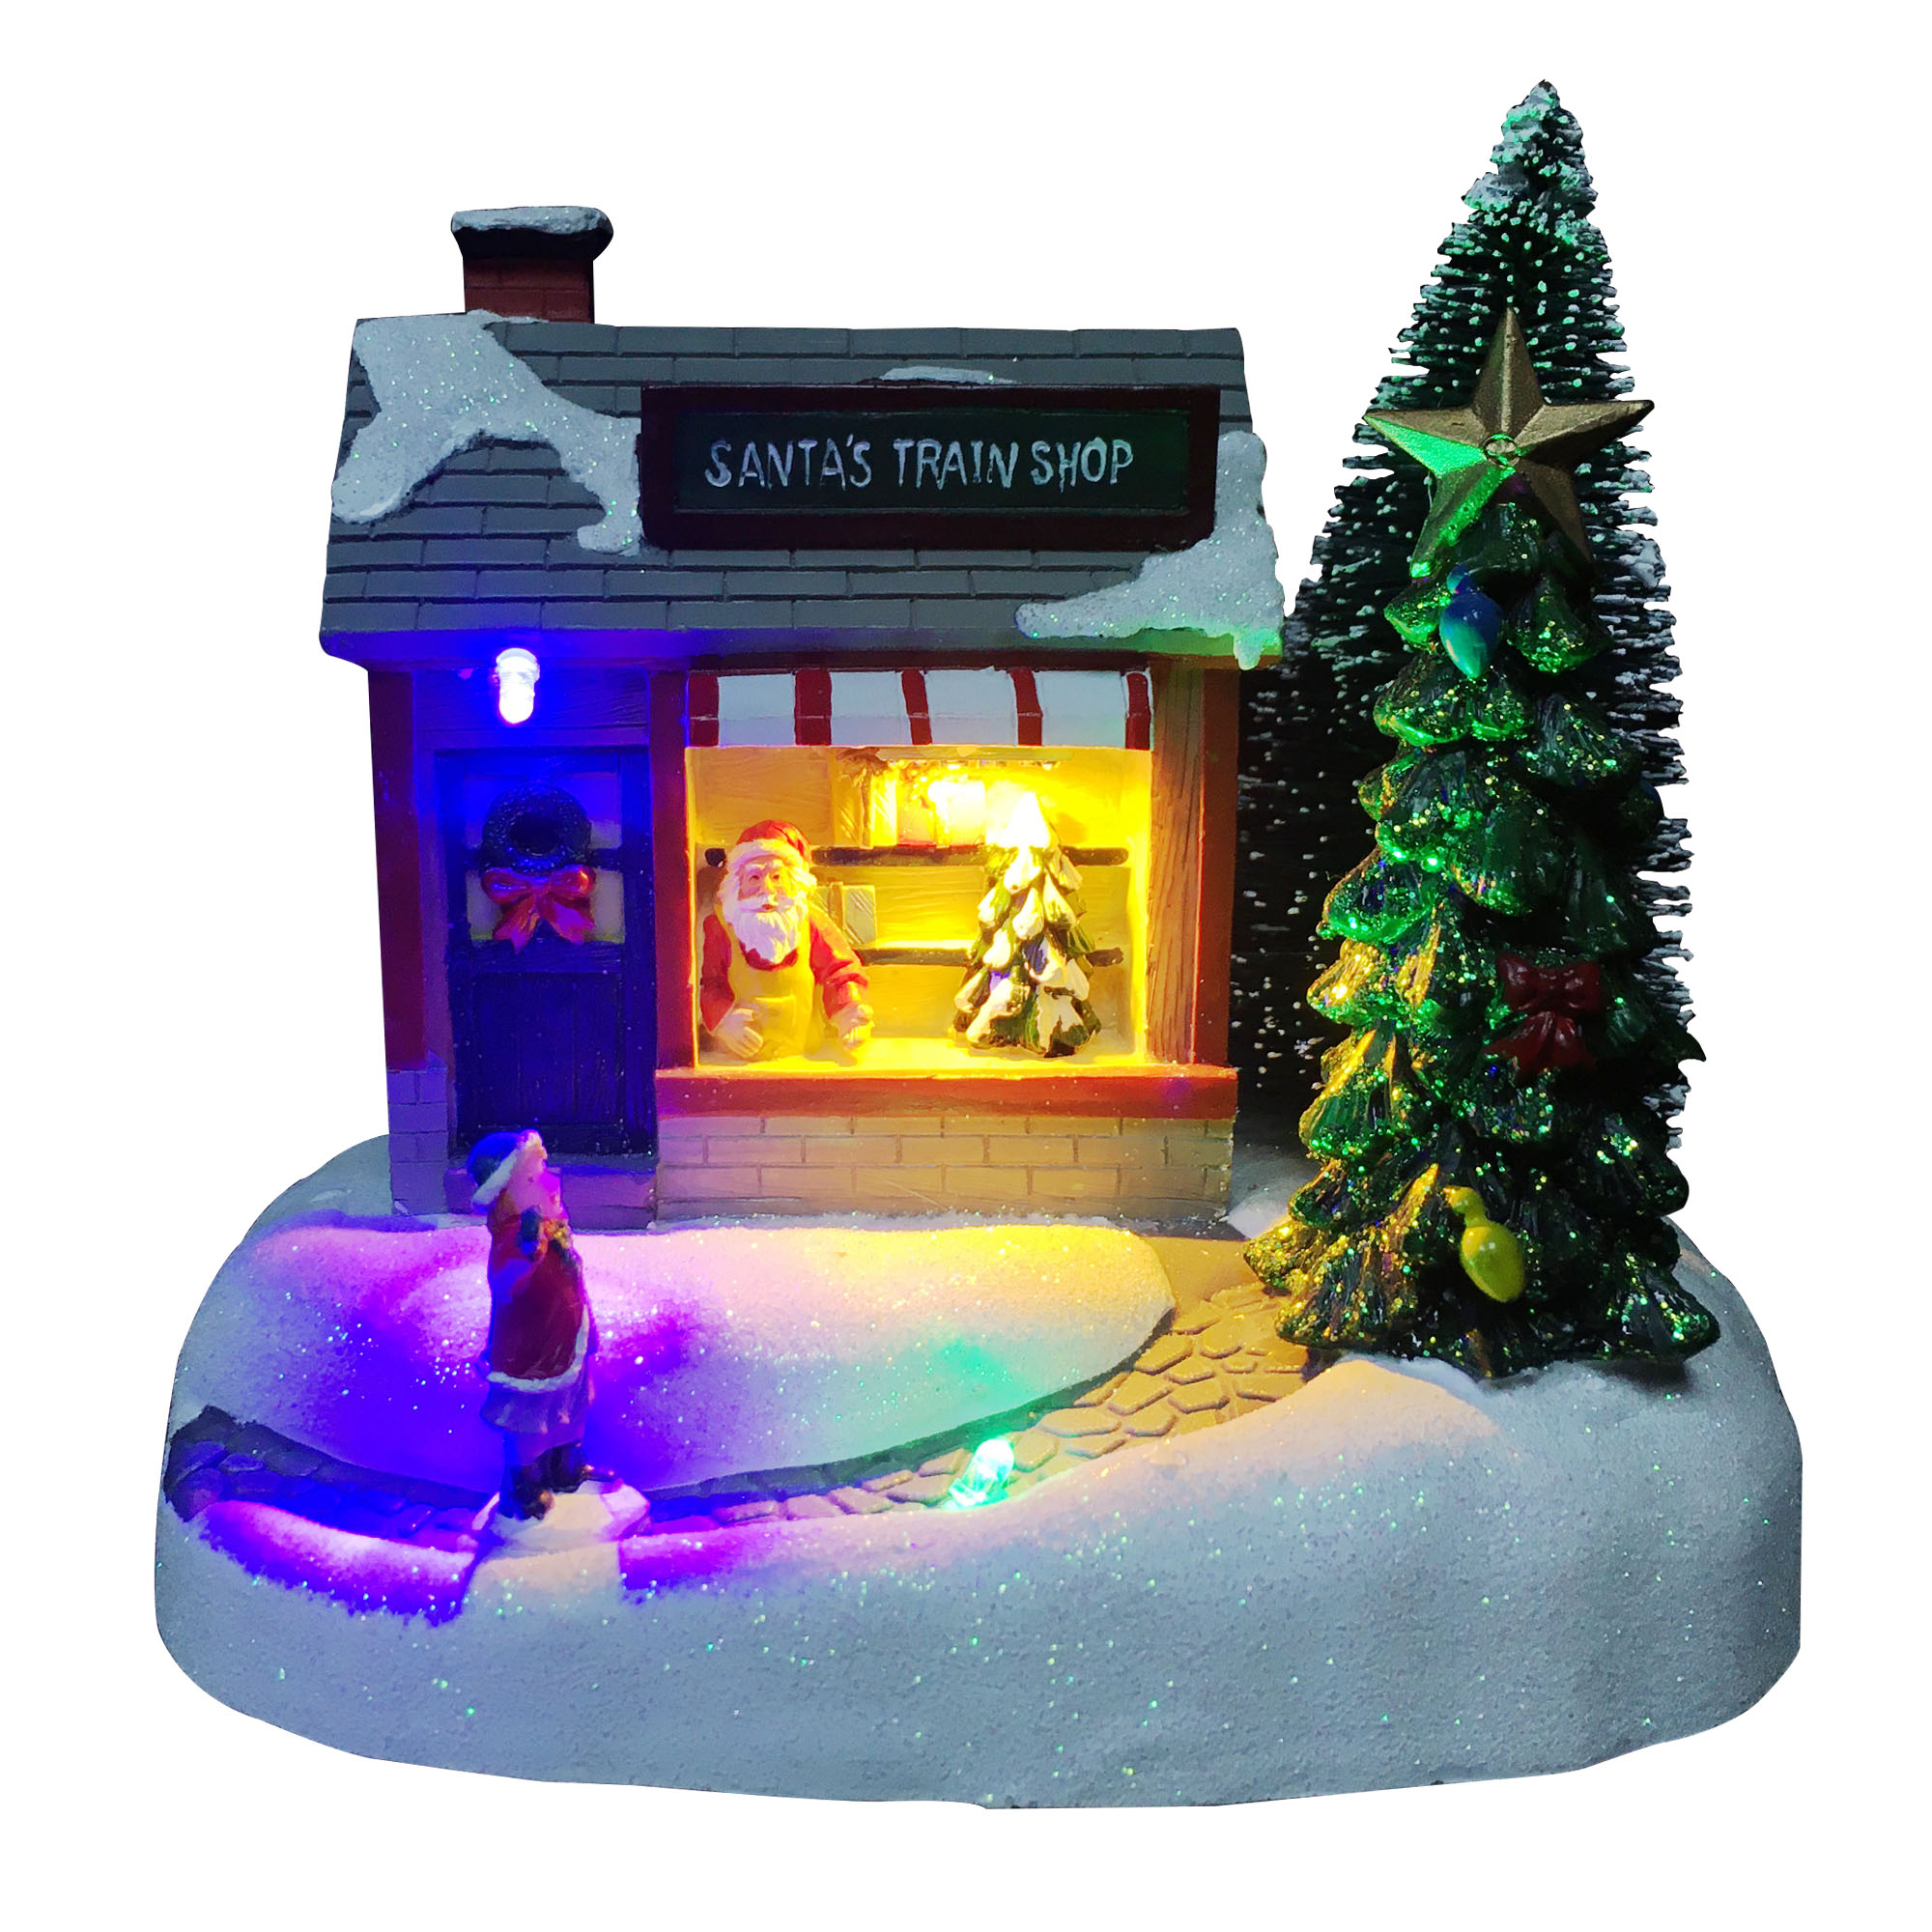 Reasonable price Animated Christmas Village With Music - Melody colorful Xmas village Christmas Decoration Santa’s Train Shop scene led lighted Christmas house – Melody